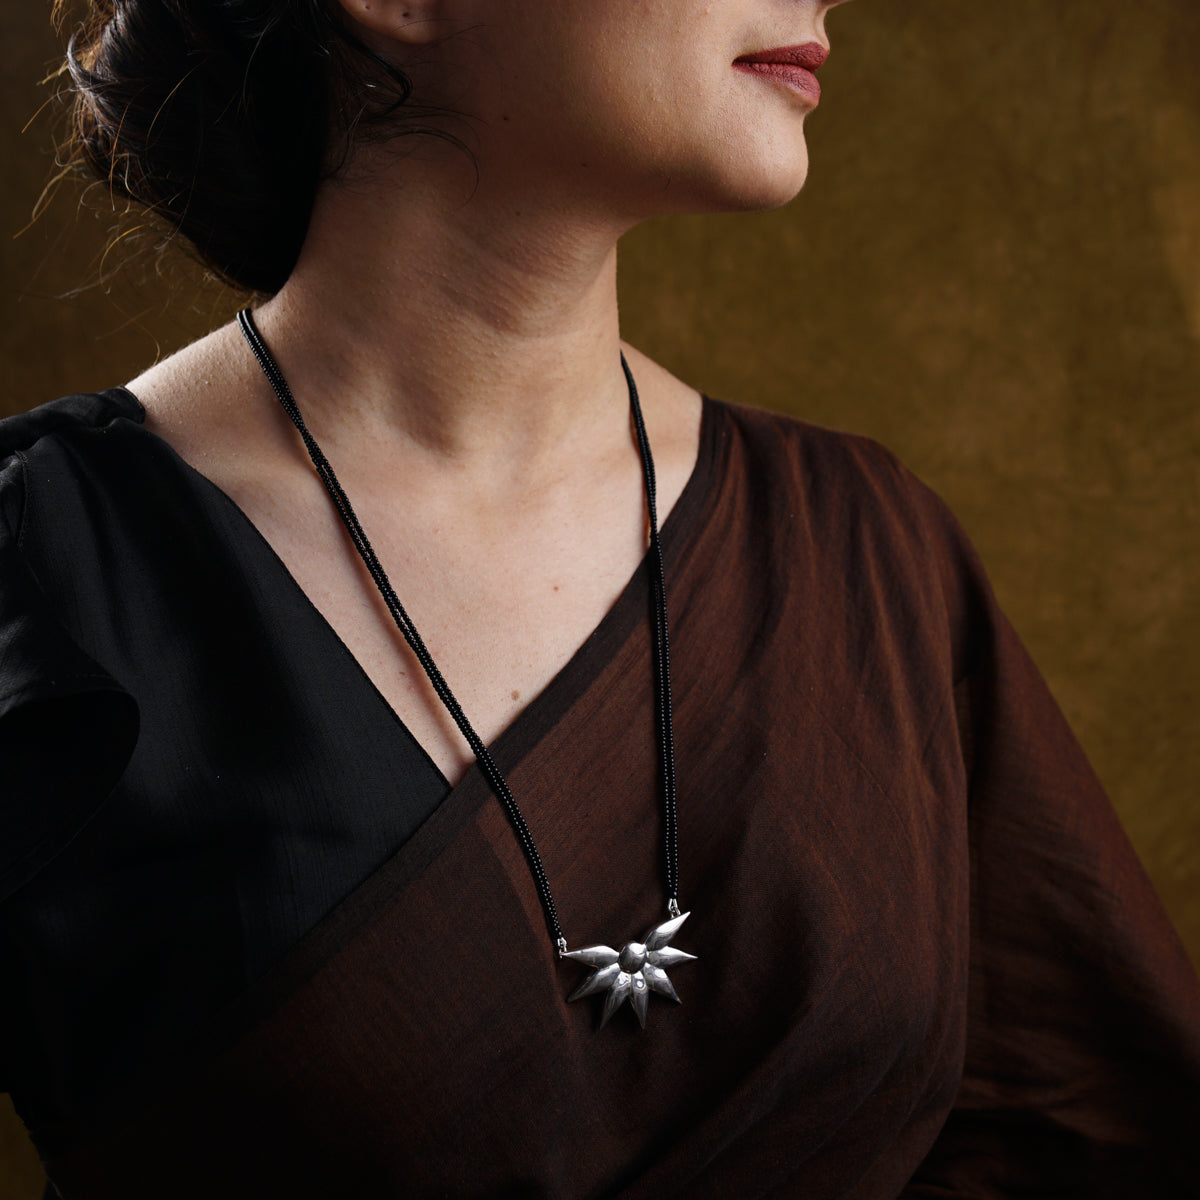 a woman wearing a necklace with a star on it